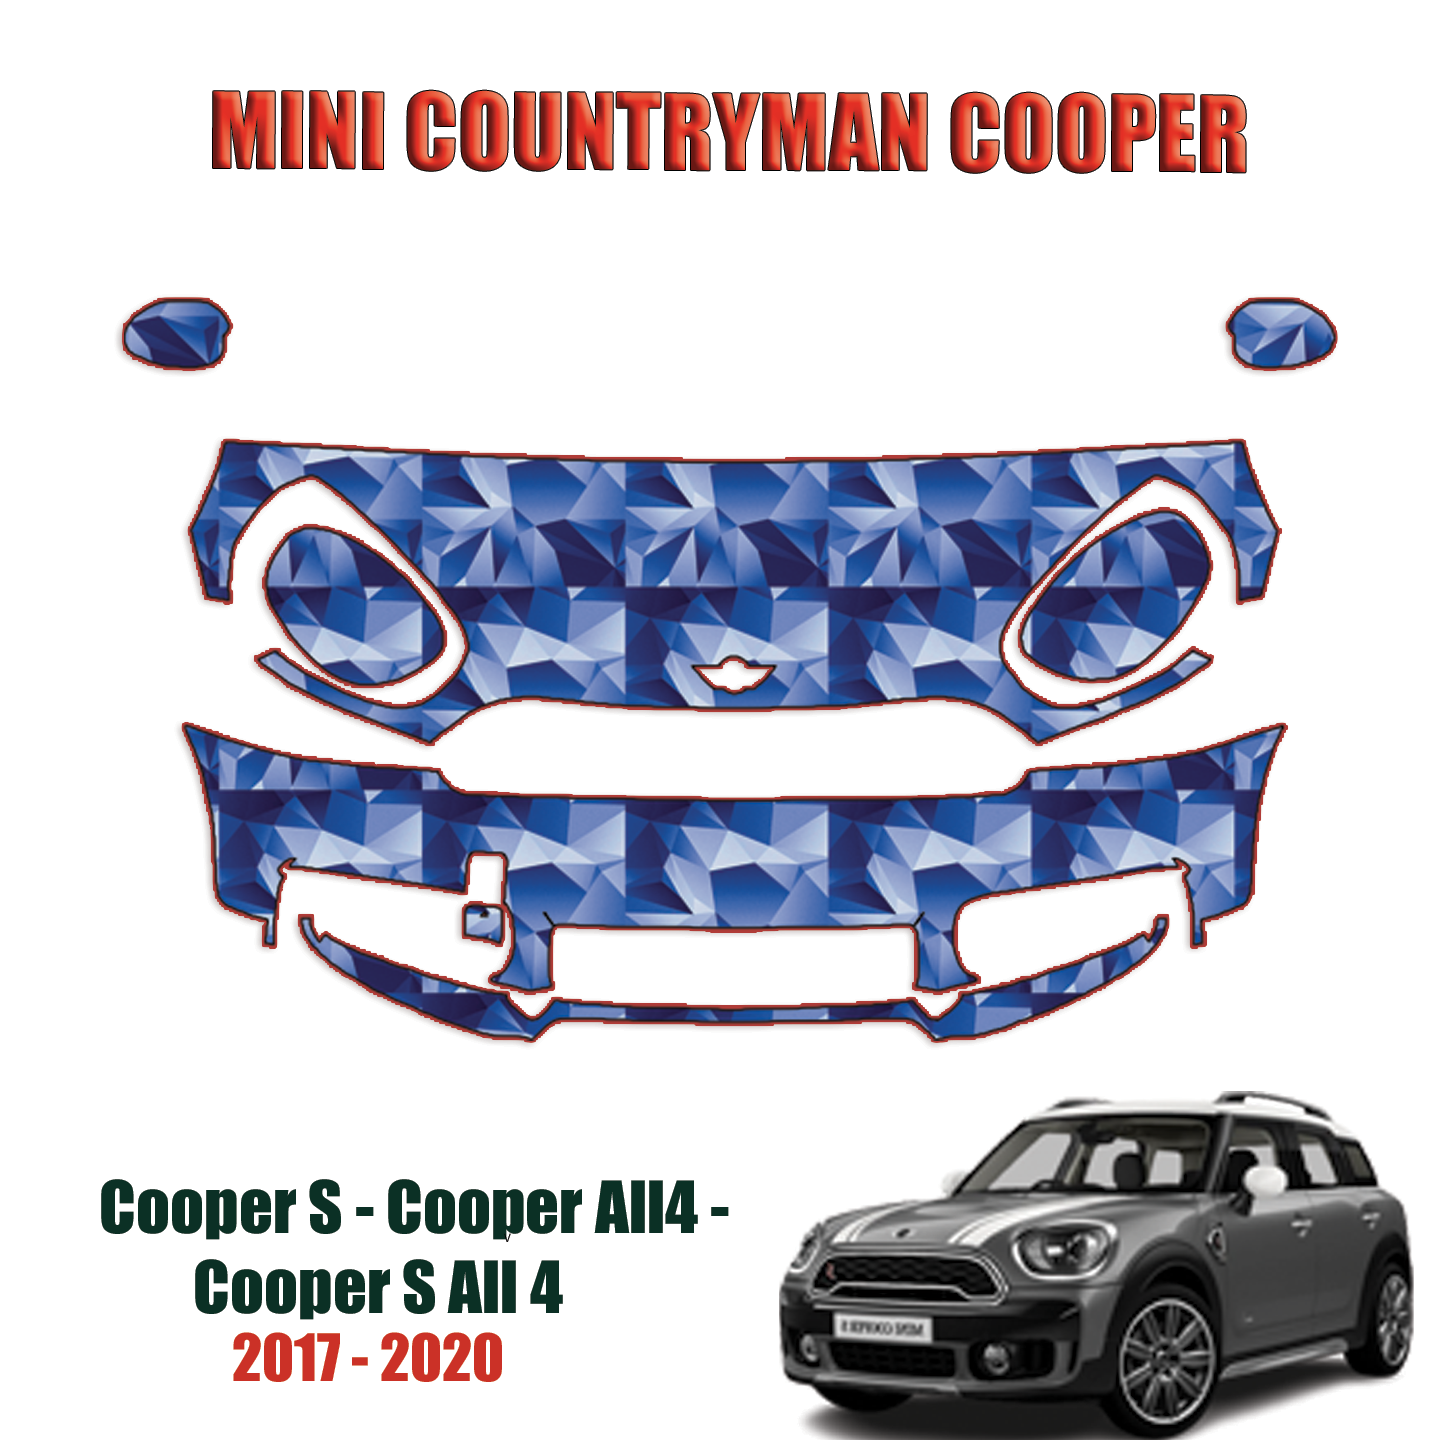 2017-2020 Mini Countryman Cooper – Cooper S, Cooper All4, Cooper S All 4 Pre-Cut Paint Protection Kit – Partial Front